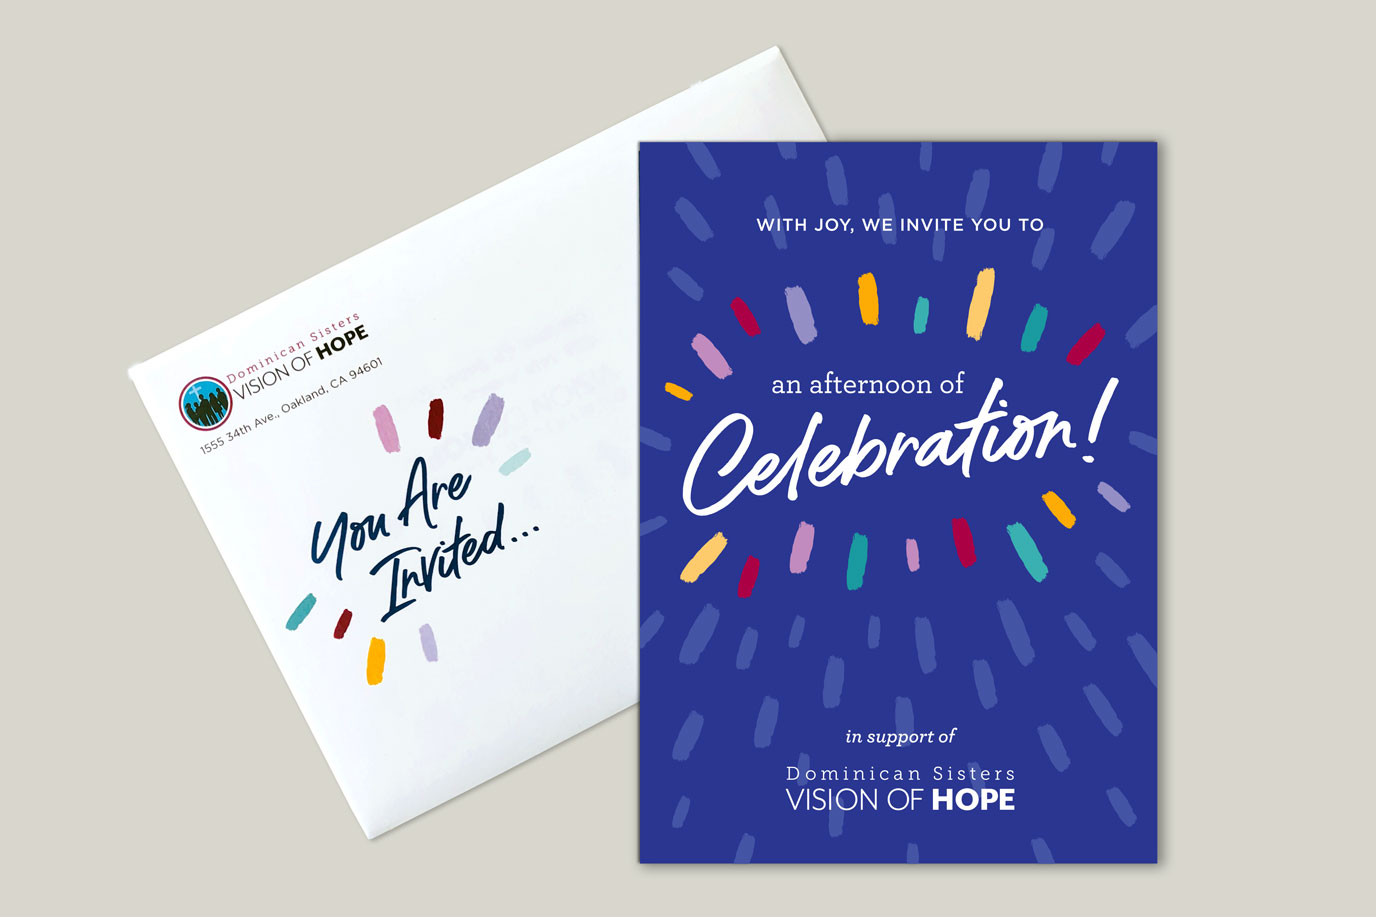 Vision of Hope - Fundraising Campaign Invite